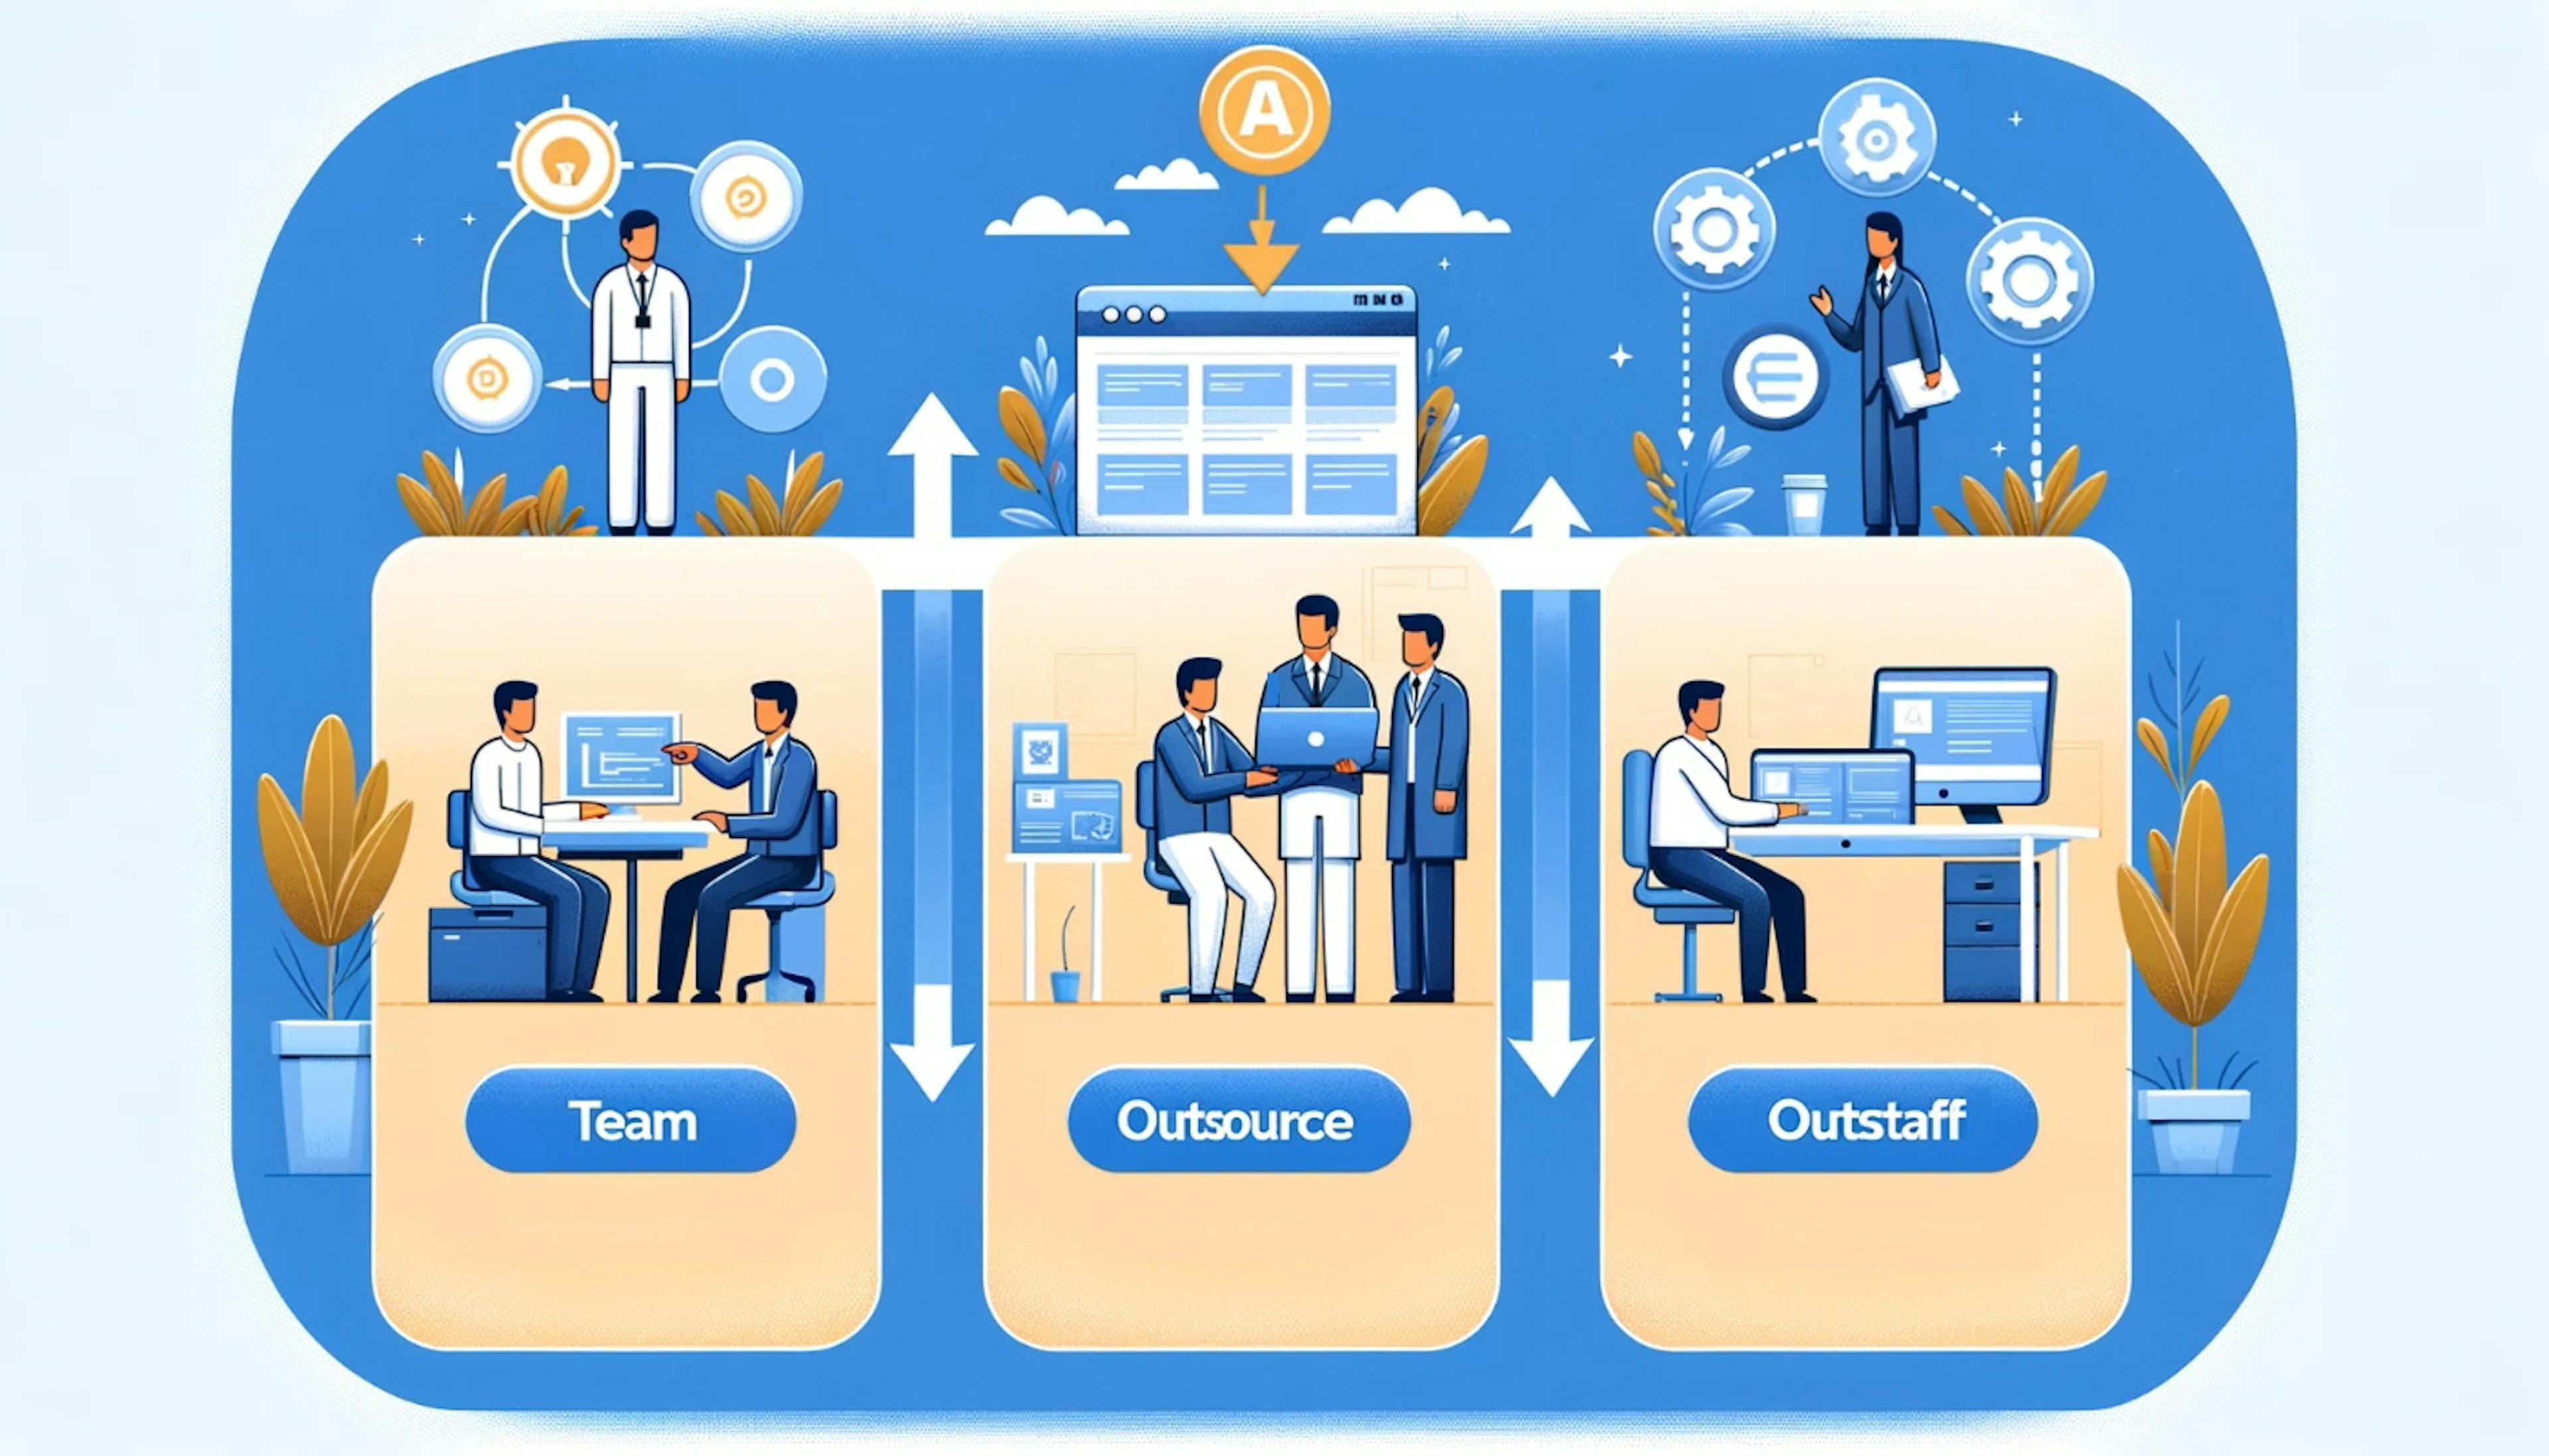 featured image - How to Choose the Best Staffing Model for App Development: Team Augmentation, Outsource, or Outstaff